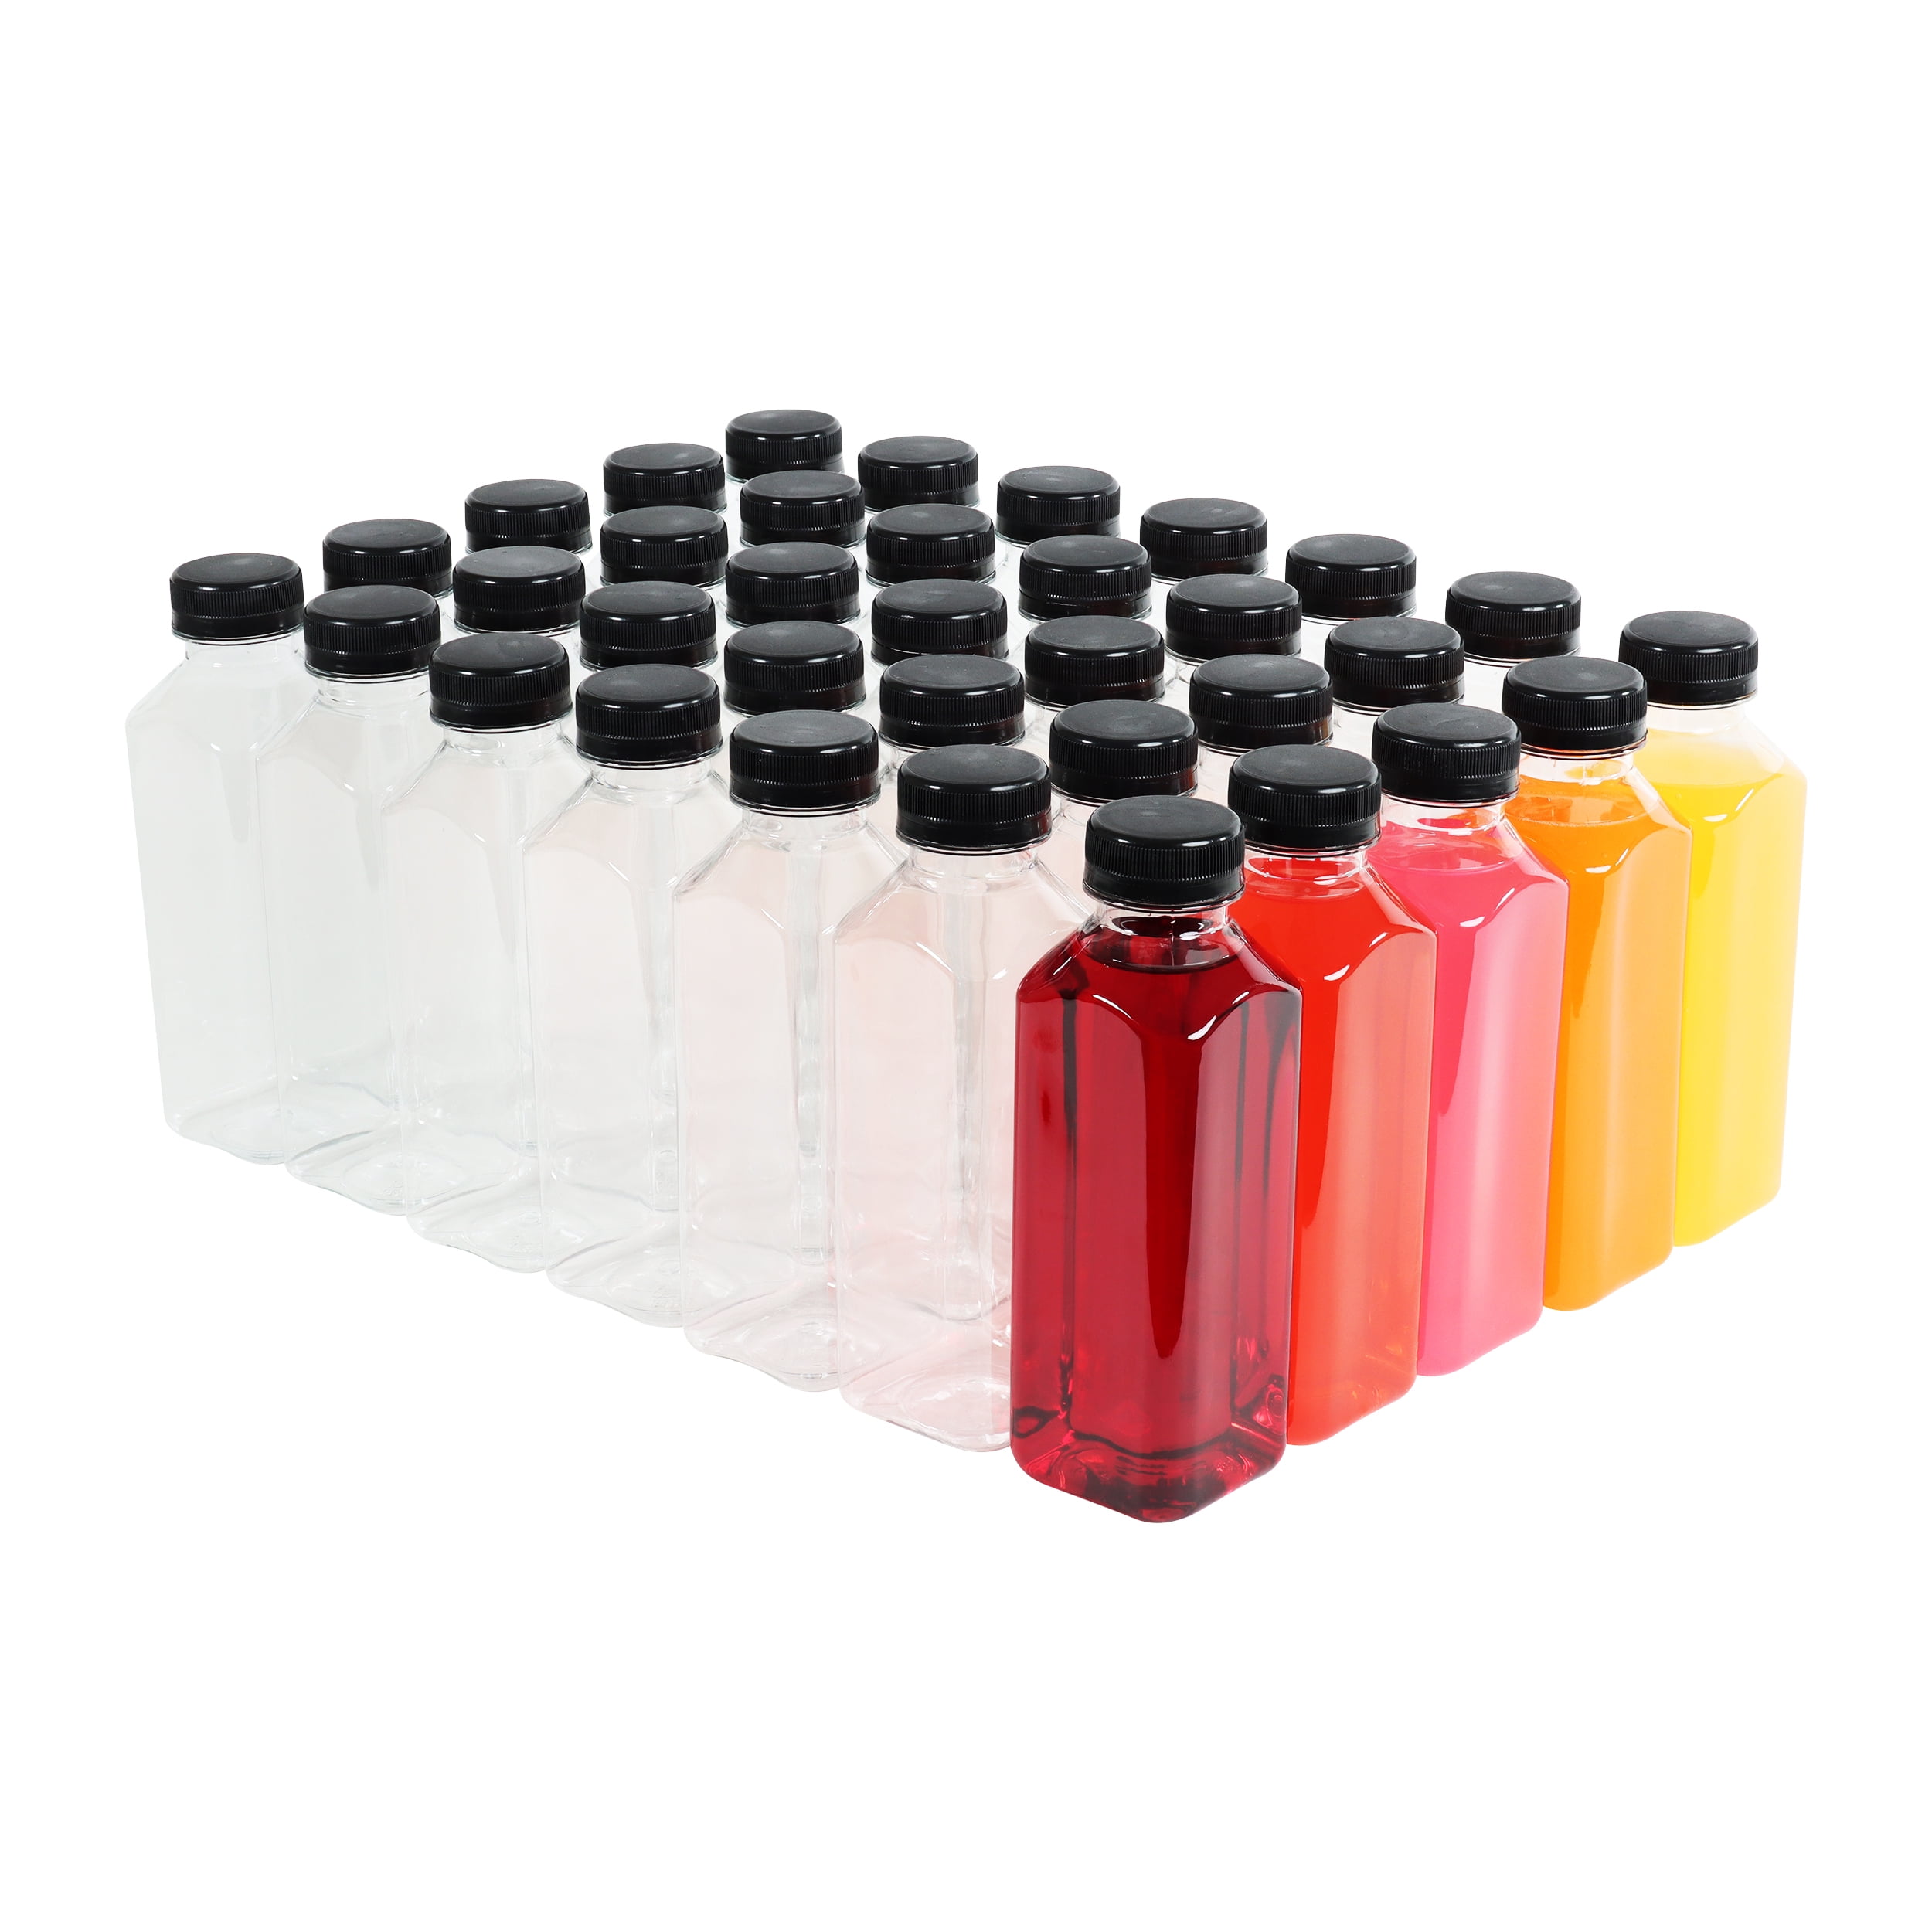 OAMCEG 36 PCS Juice Bottles with Caps, 8 oz Small Bottles for Liquids,  Plastic Containers with Lids,…See more OAMCEG 36 PCS Juice Bottles with  Caps, 8